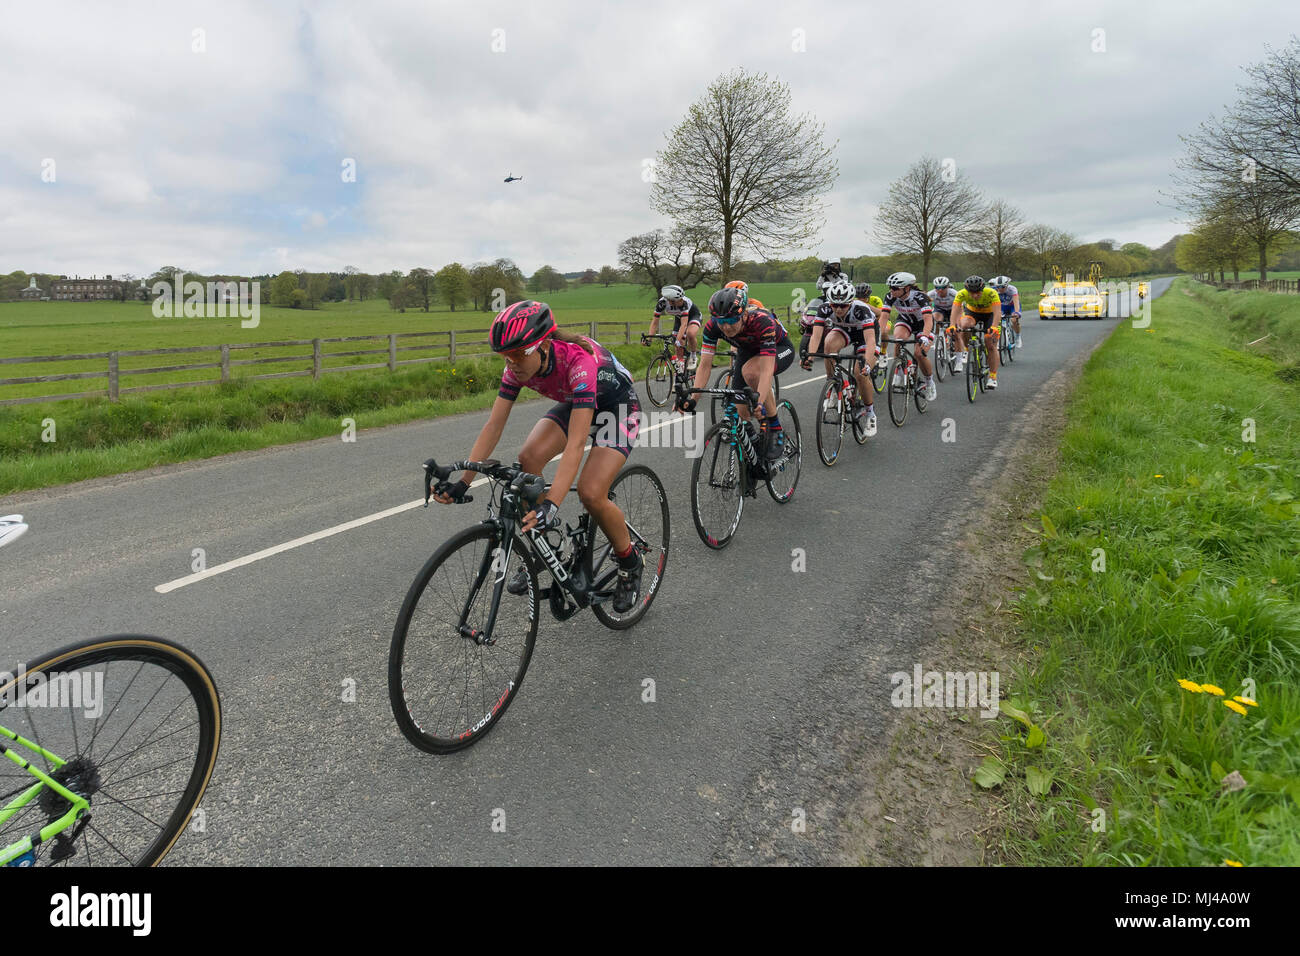 Near Denton, North Yorkshire, 4th May 2018. Close-up of group of female or women cyclists in the Asda Women's Tour de Yorkshire, racing past Denton Hall, on straight countryside lane near Ilkley, North Yorkshire, England, UK. Credit: Ian Lamond/Alamy Live News Stock Photo